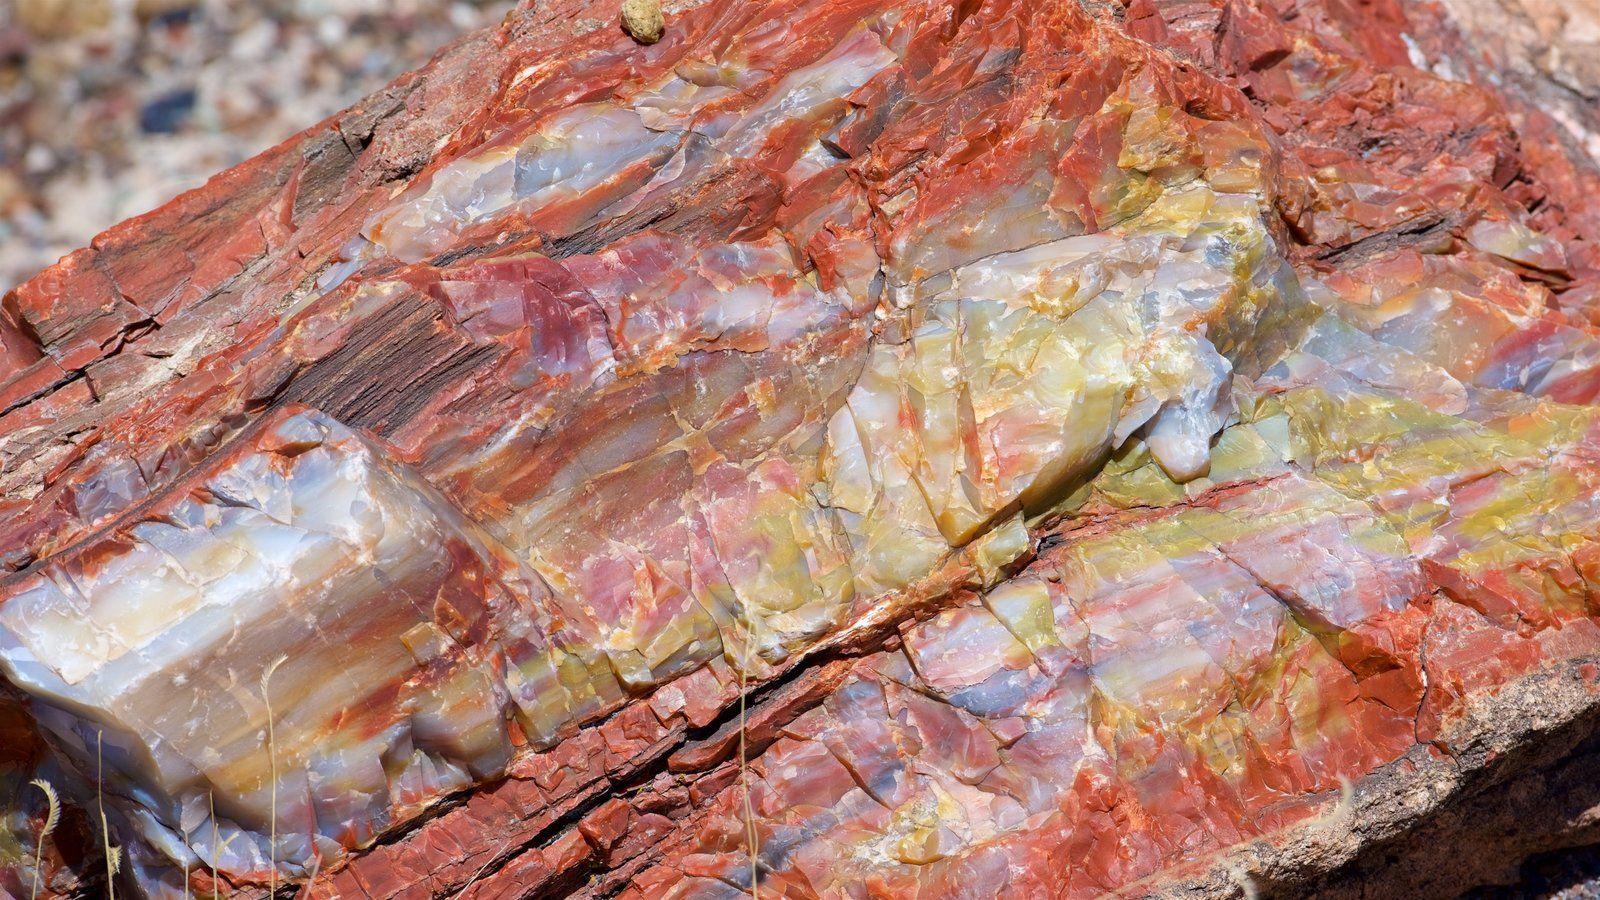 Petrified Forest National Park Picture: View Photo & Image